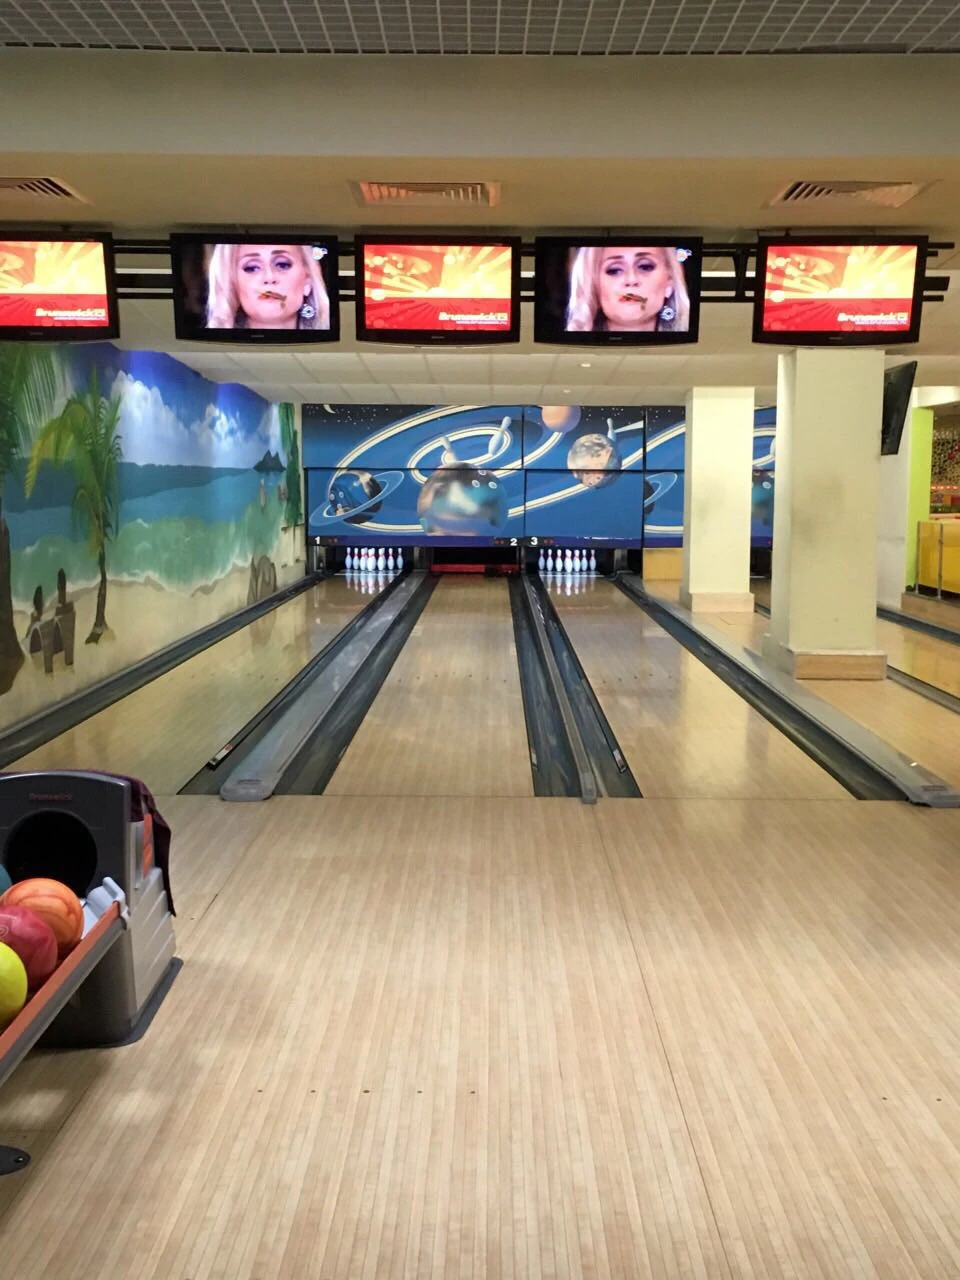 Used used bowling lanes for sale Bowling Brunswick GS-X lanes, with Vector scoring system